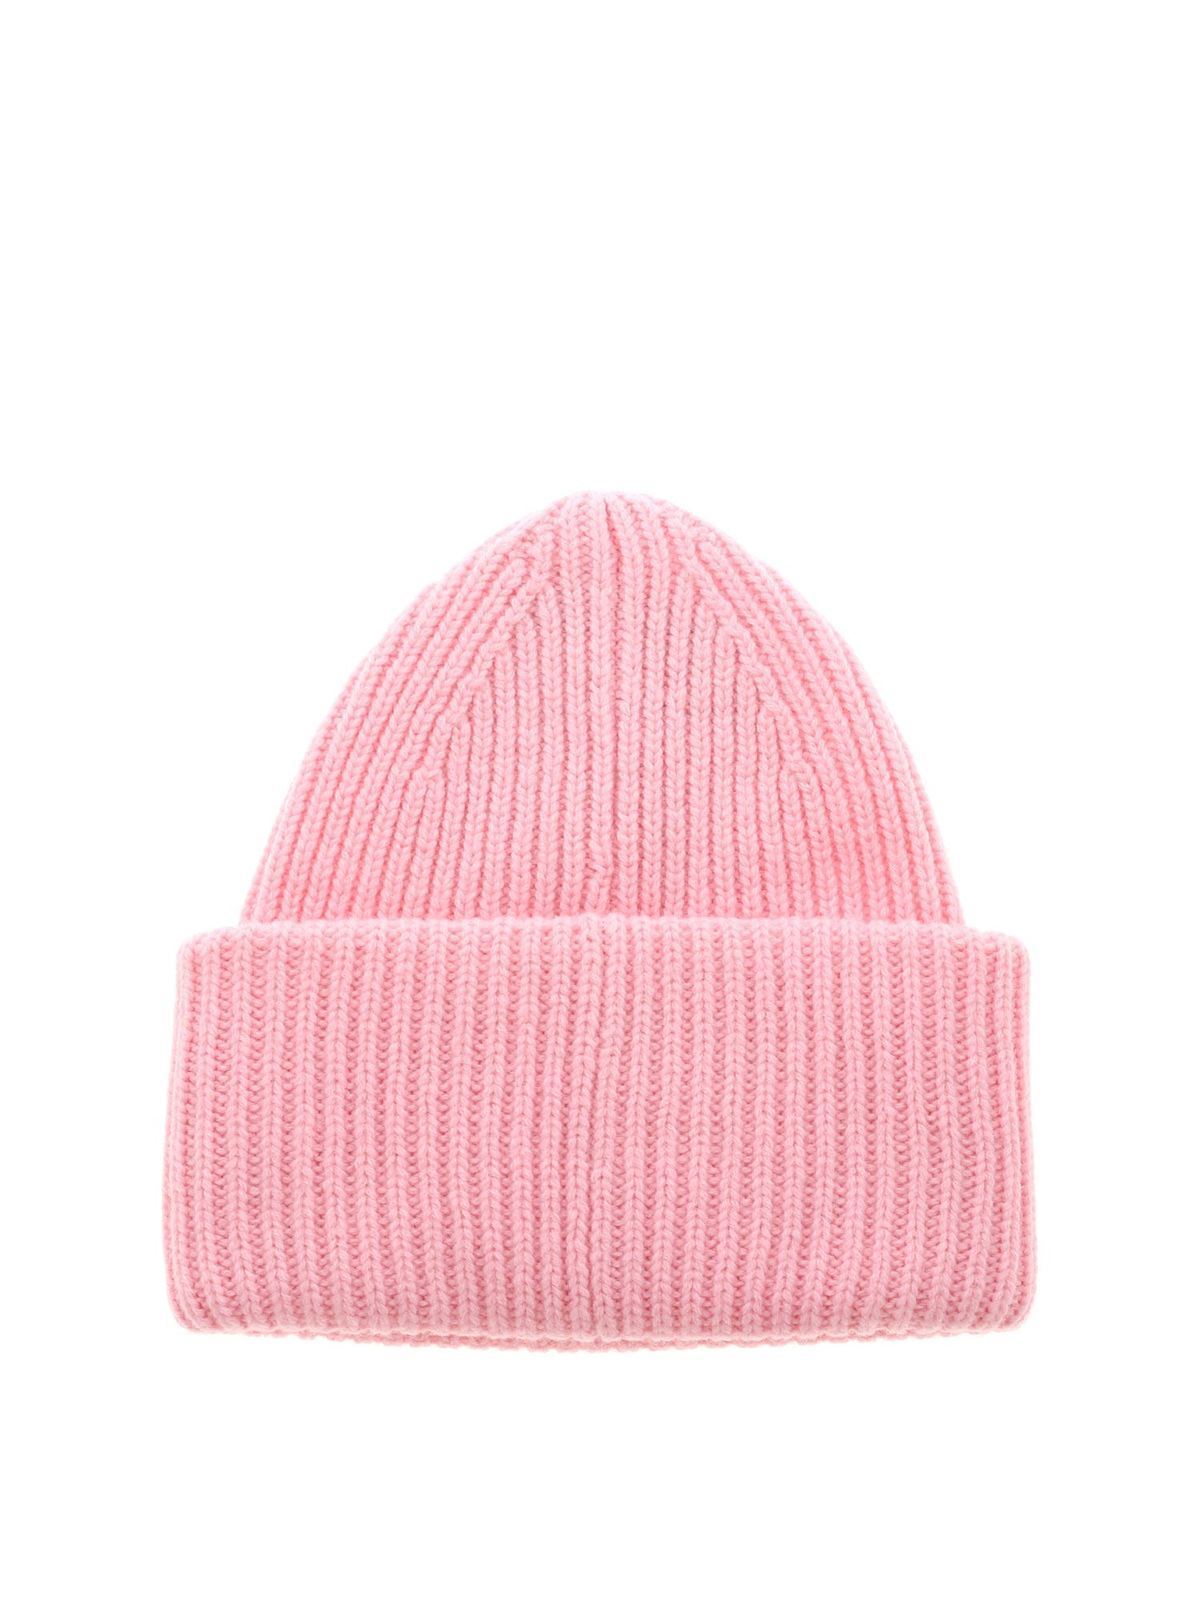 Beanies Studios - Face-patch beanie in pink - D40009BLUSHPINK